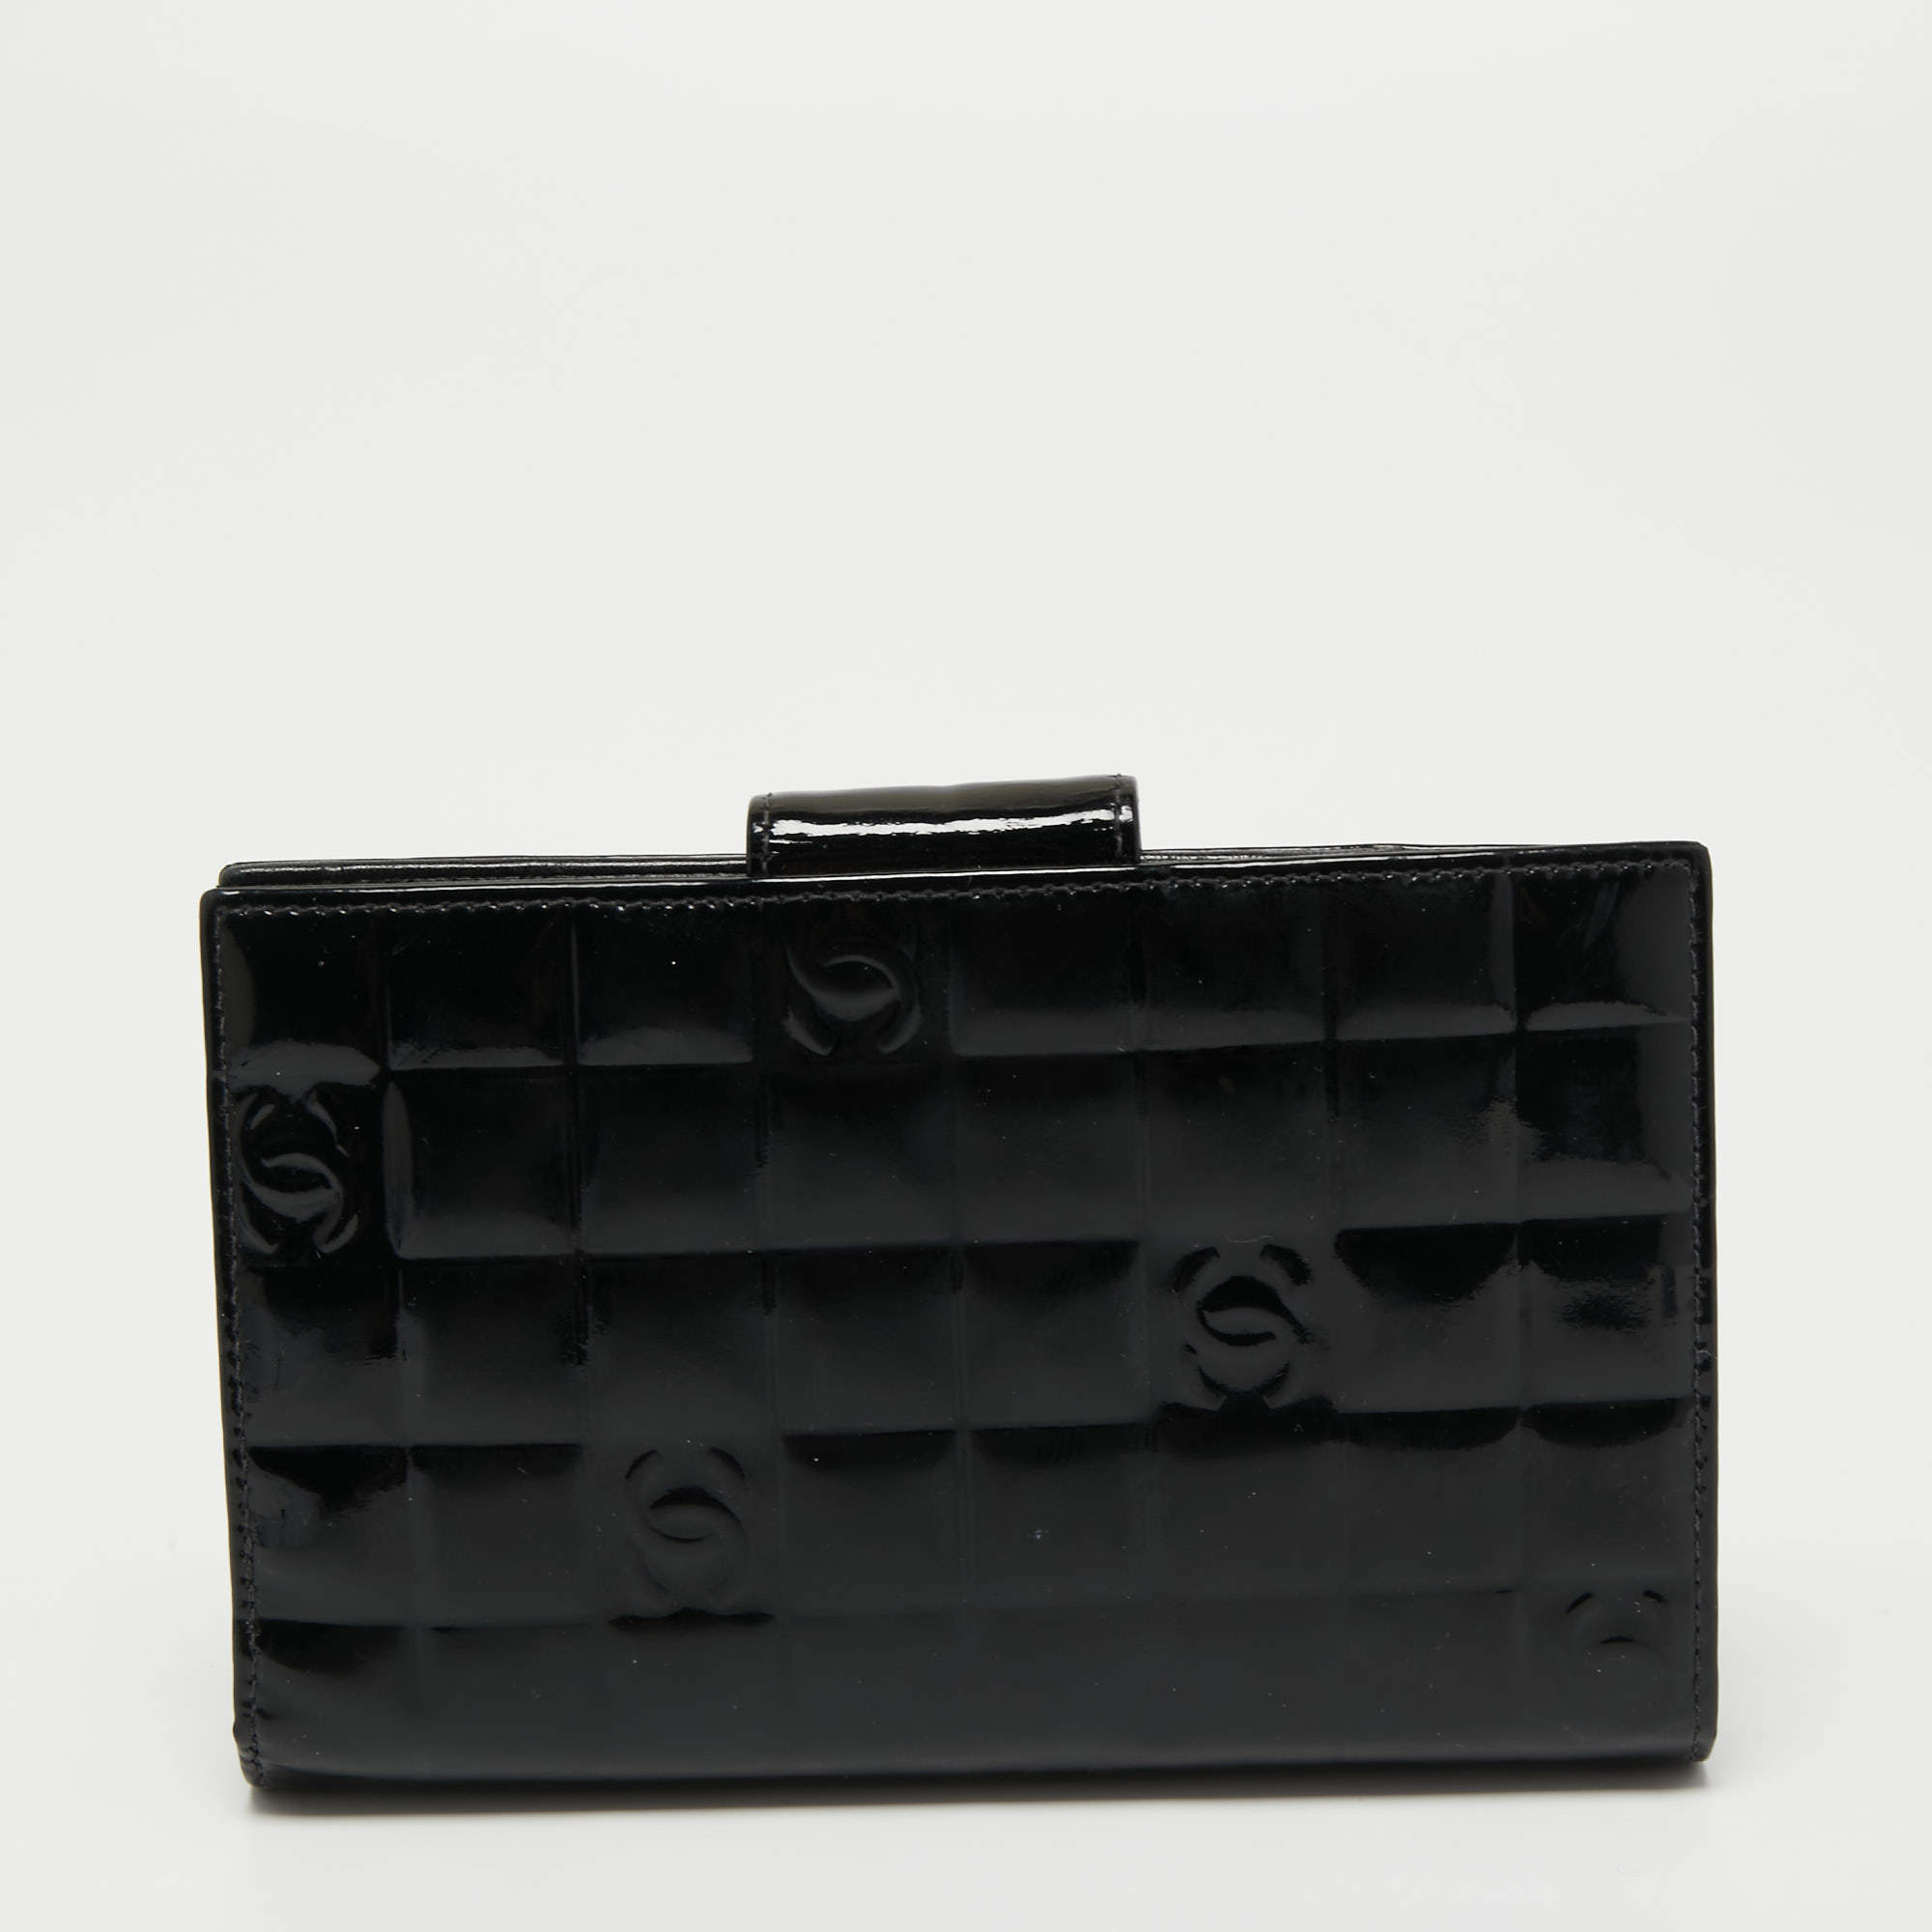 Chanel Black Cube Quilted Patent Leather Bifold Wallet Chanel